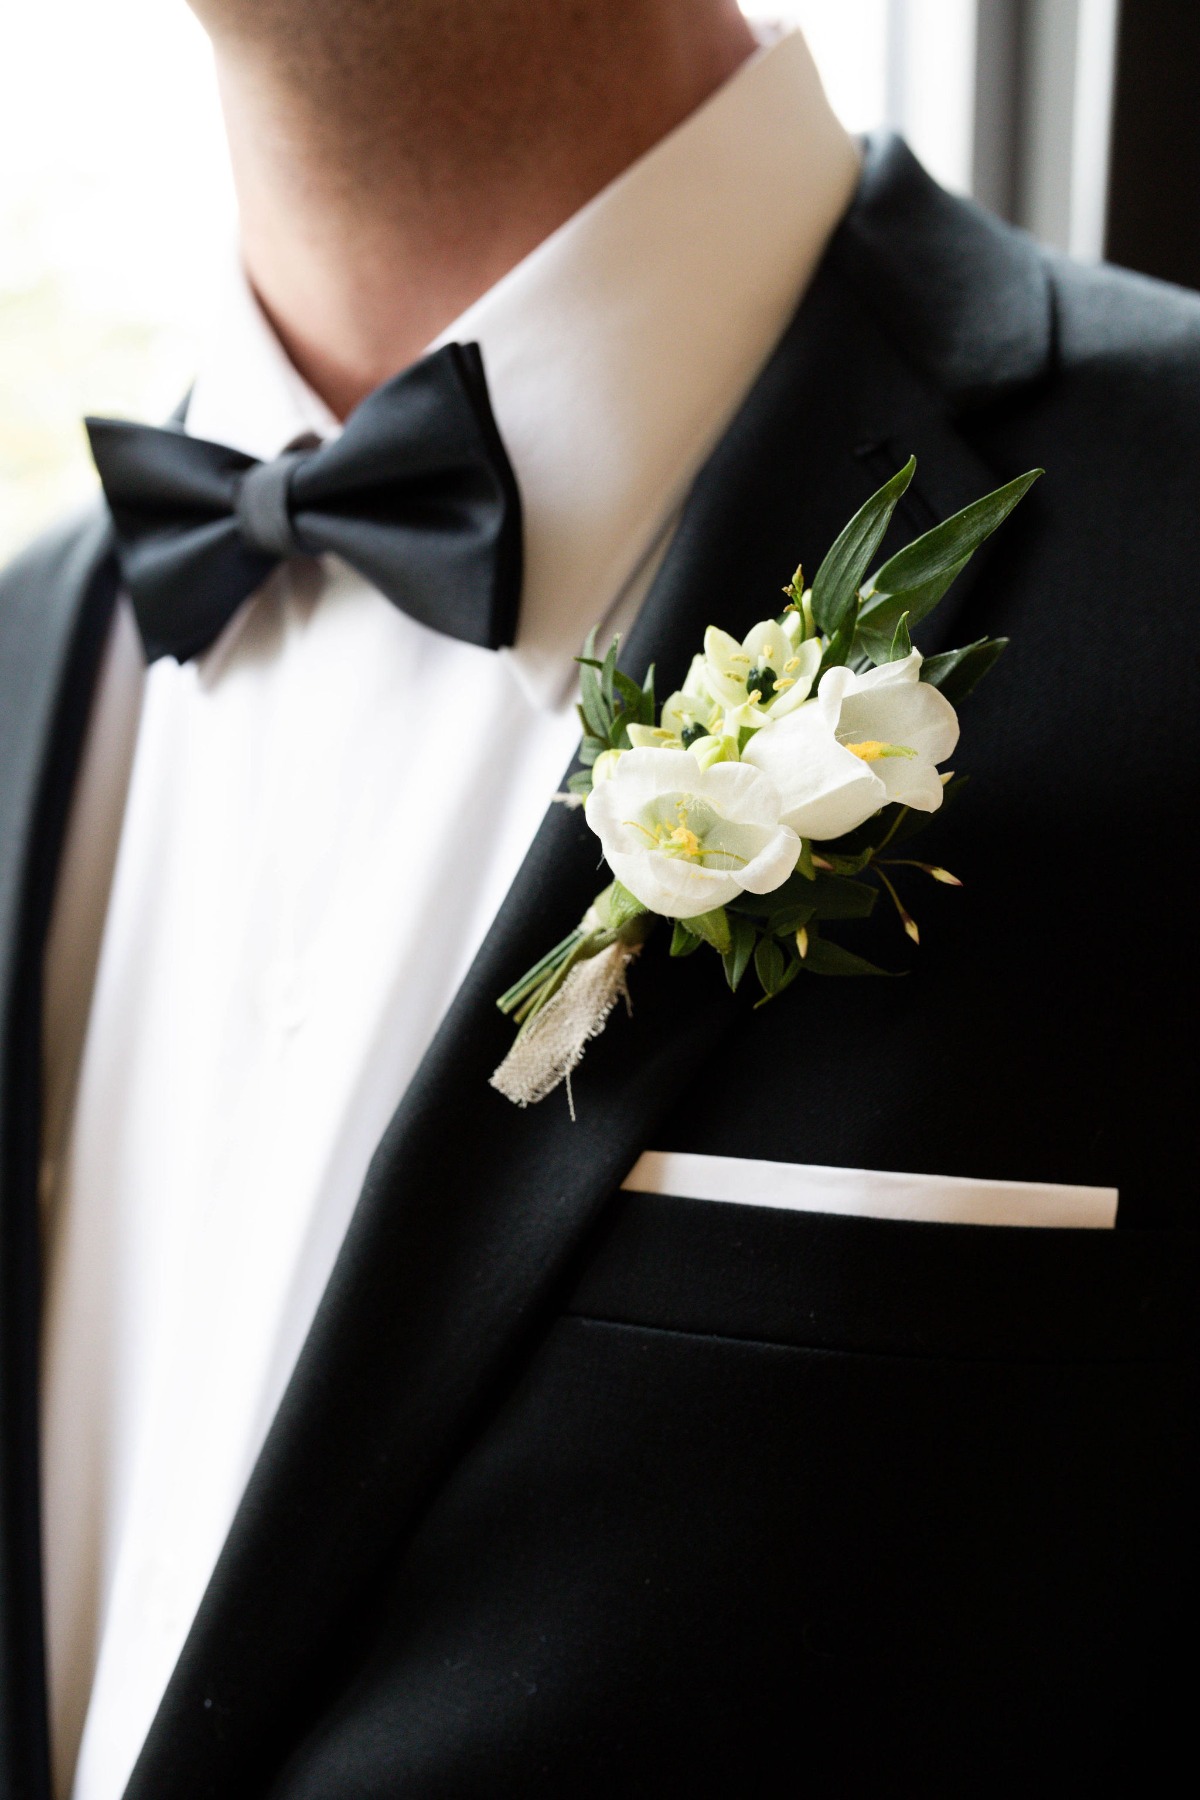 Groom's formal jacket with boutonniere